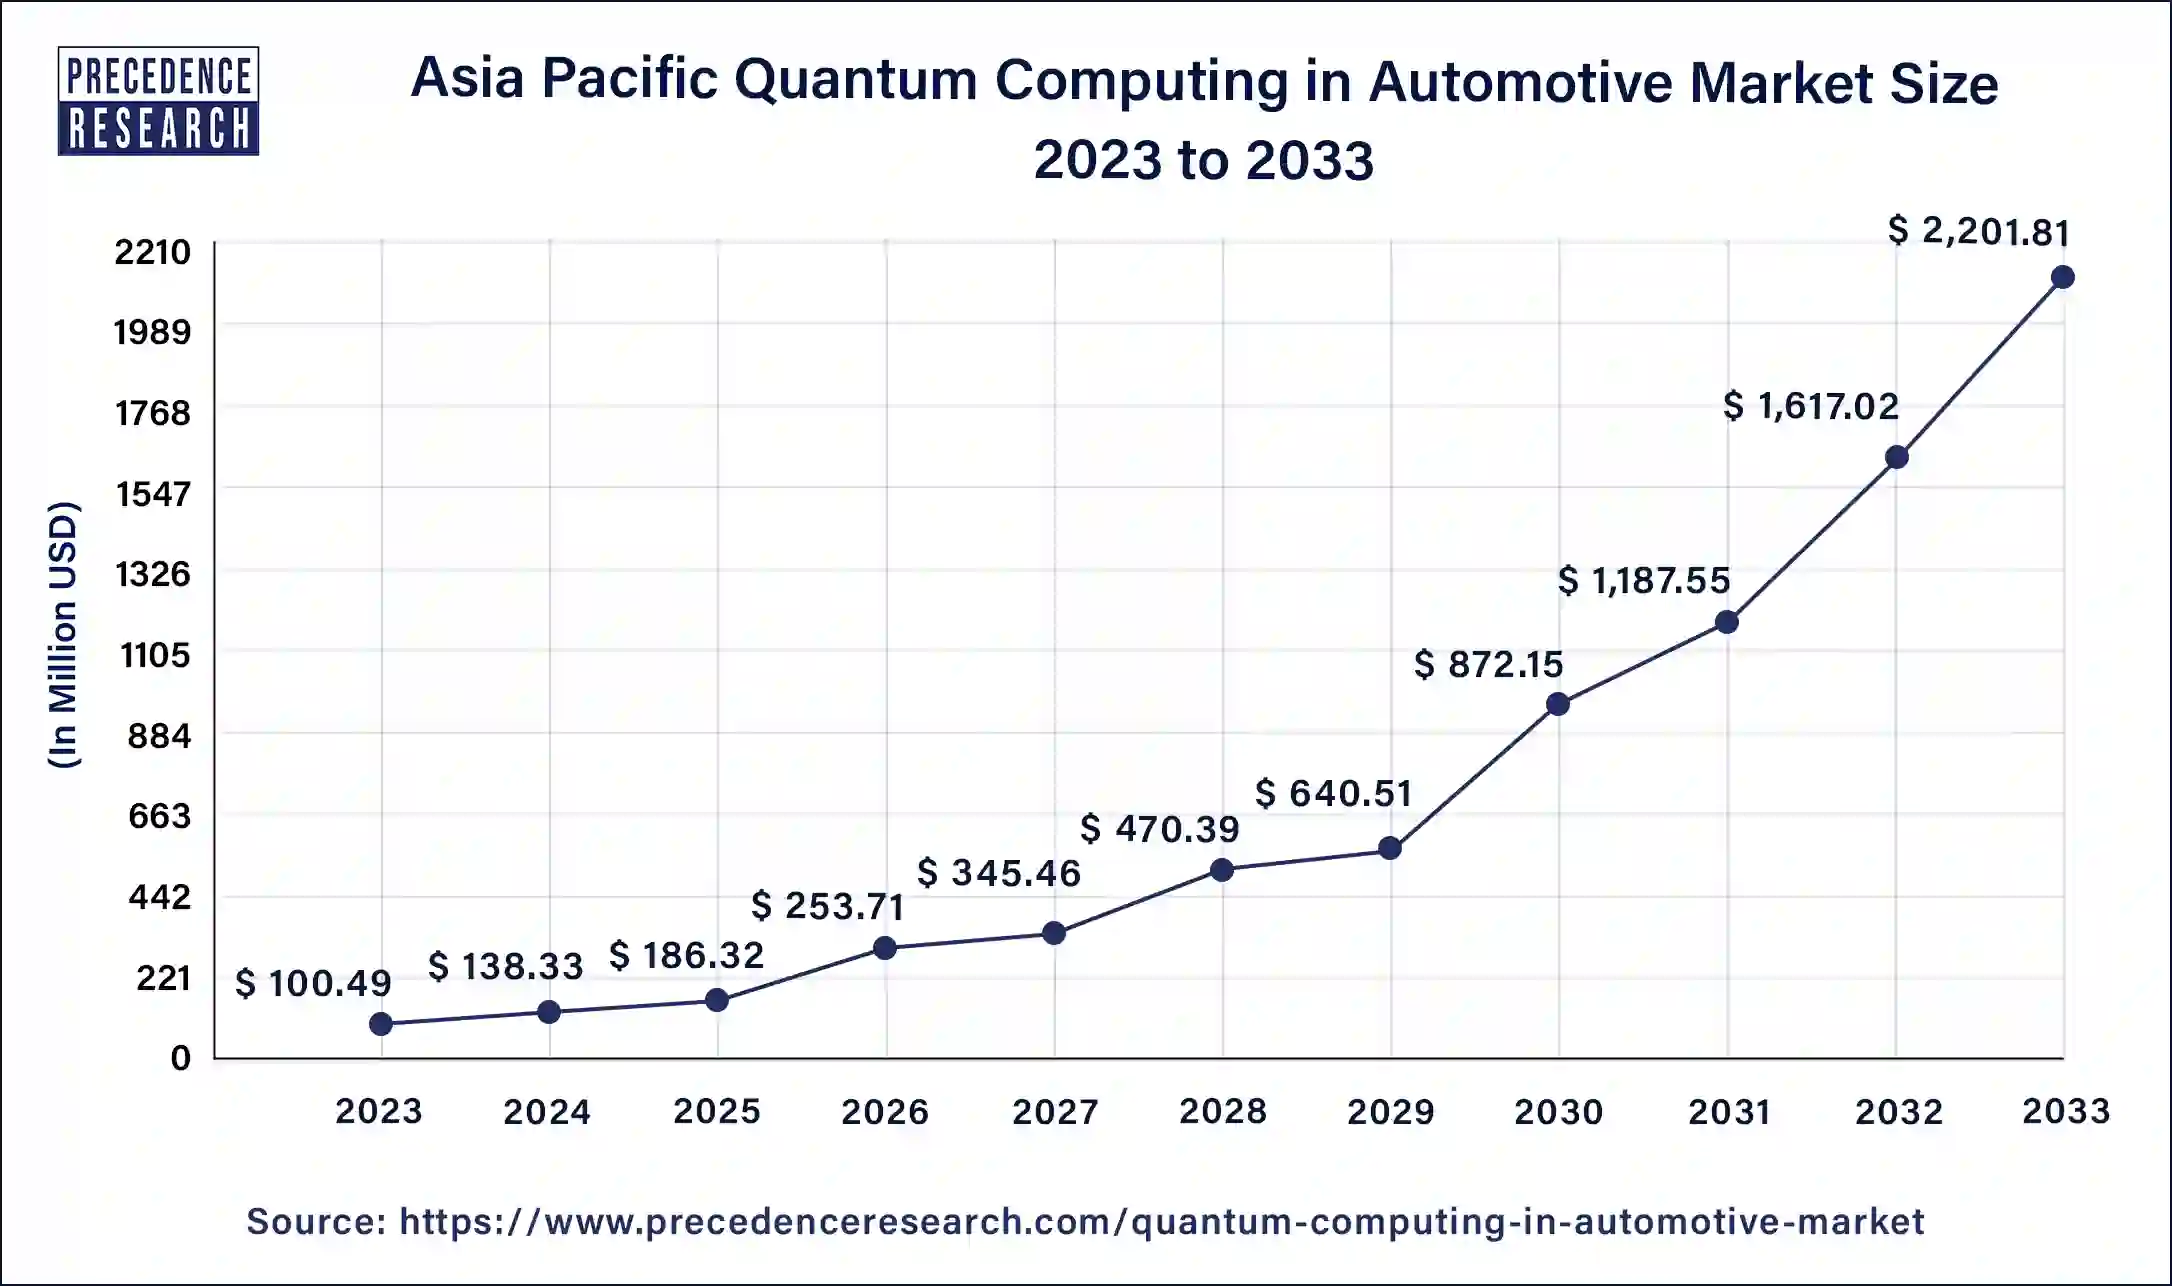 Asia Pacific Quantum Computing in Automotive Market Size 2024 to 2033